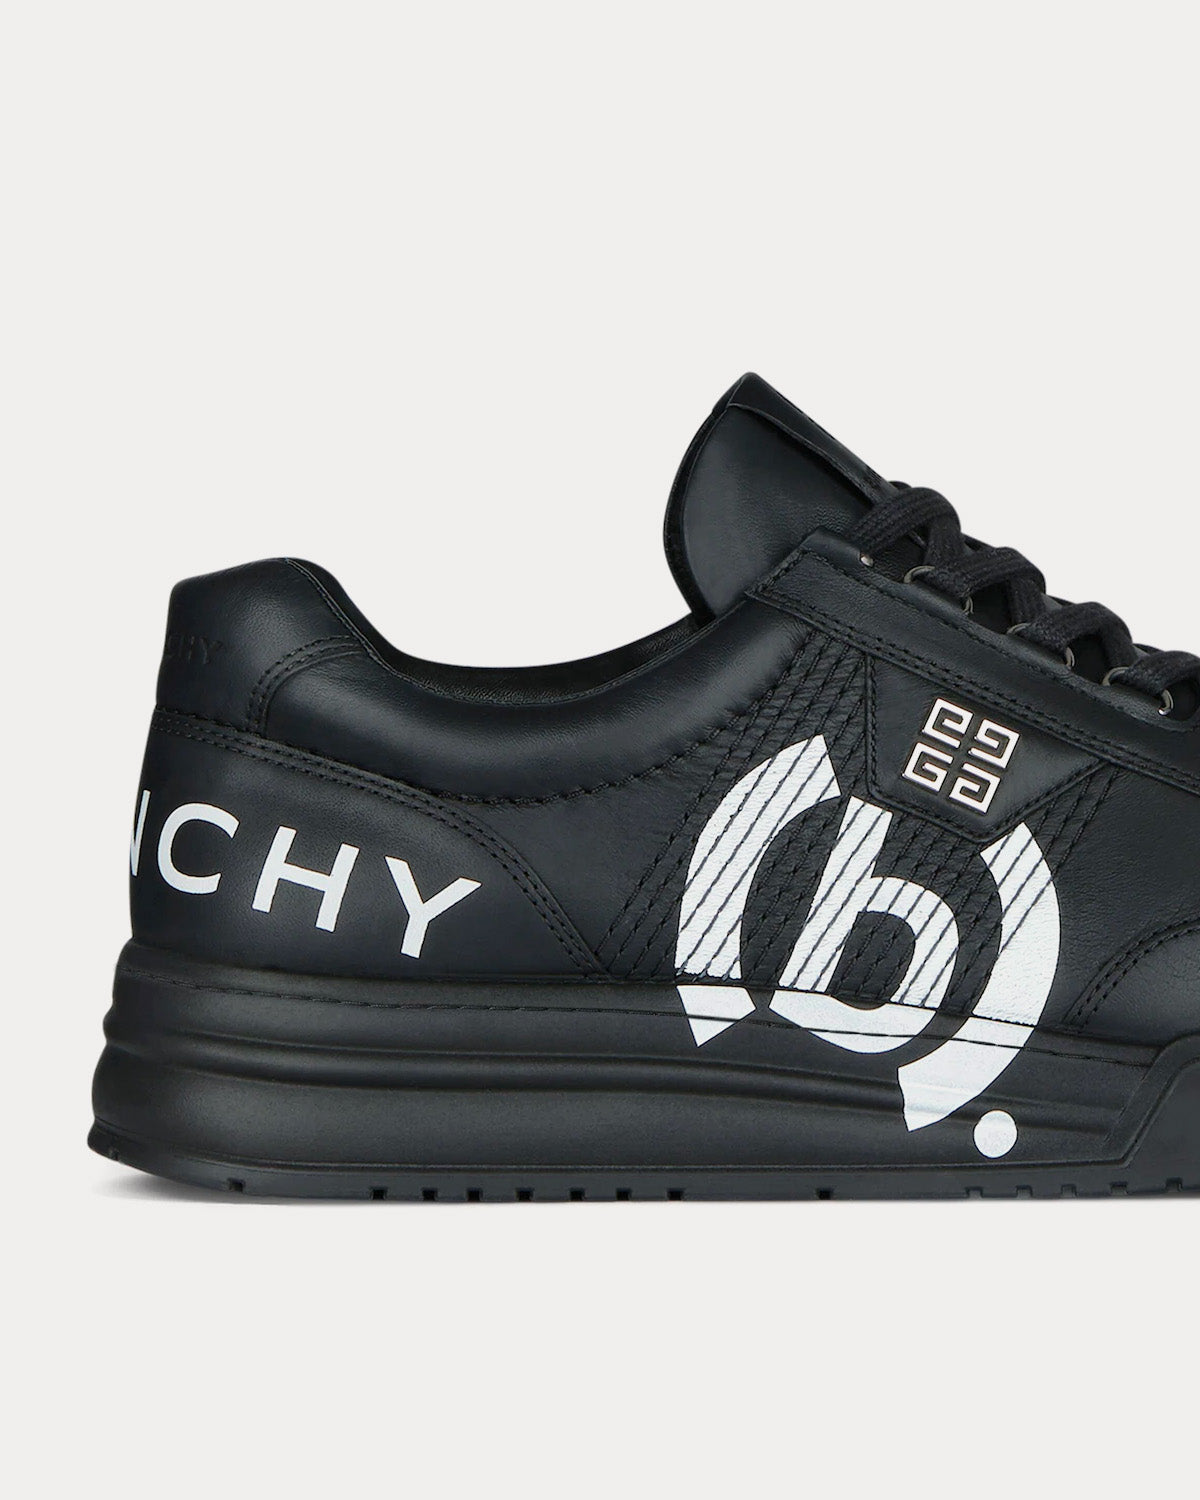 Givenchy x BSTROY - G4 Leather Black Low Top Sneakers